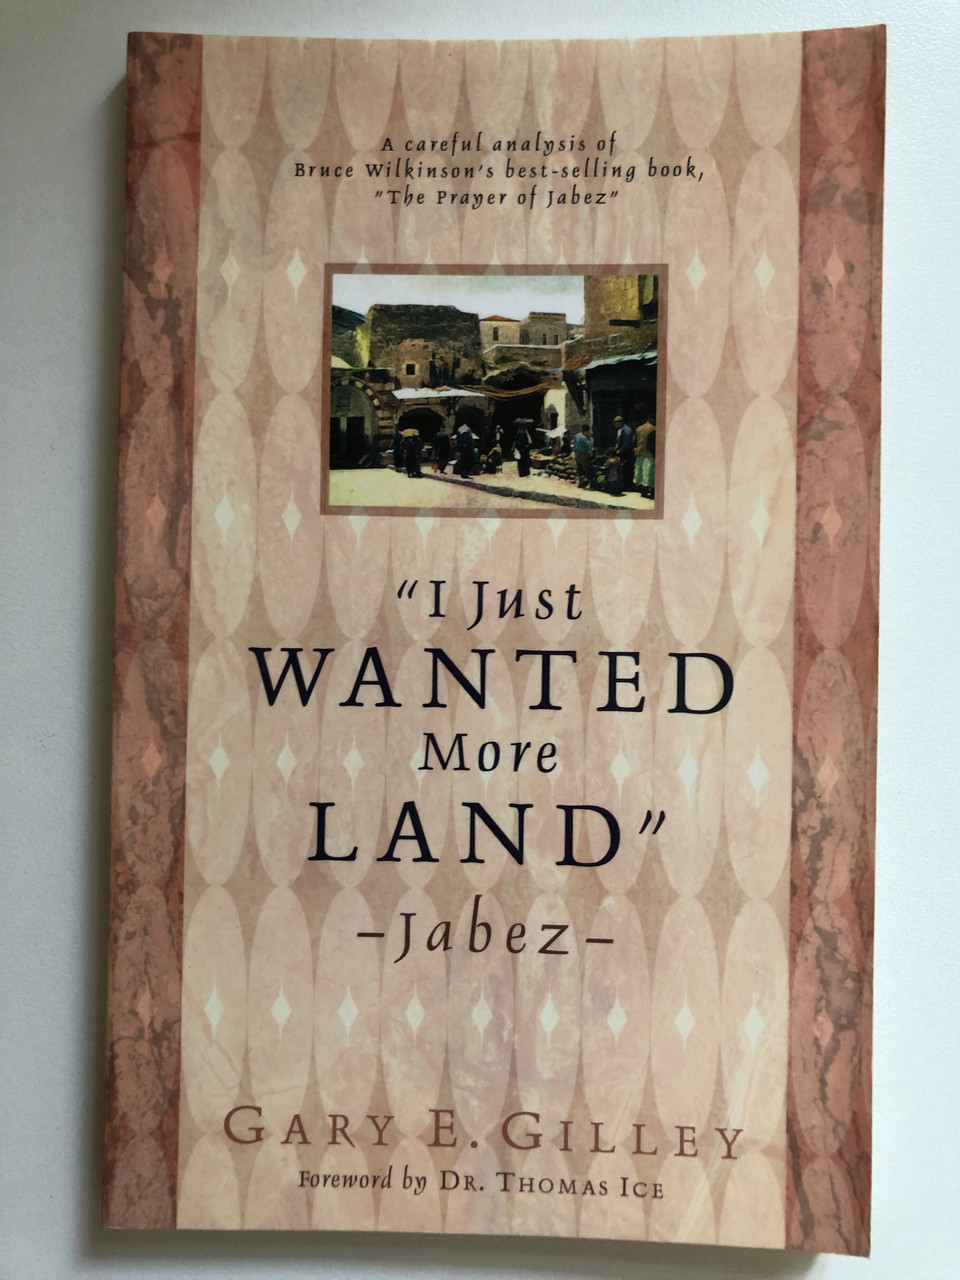 I_Just_Wanted_More_Land_by_Gary_Gilley_A_careful_analysis_of_Bruce_Wilkinsons_best-selling_book_The_Prayer_of_Jabez_Precise_biblical_interpretation_Publisher_Xul___68070.1691330779.1280.1280.JPG (960×1280)